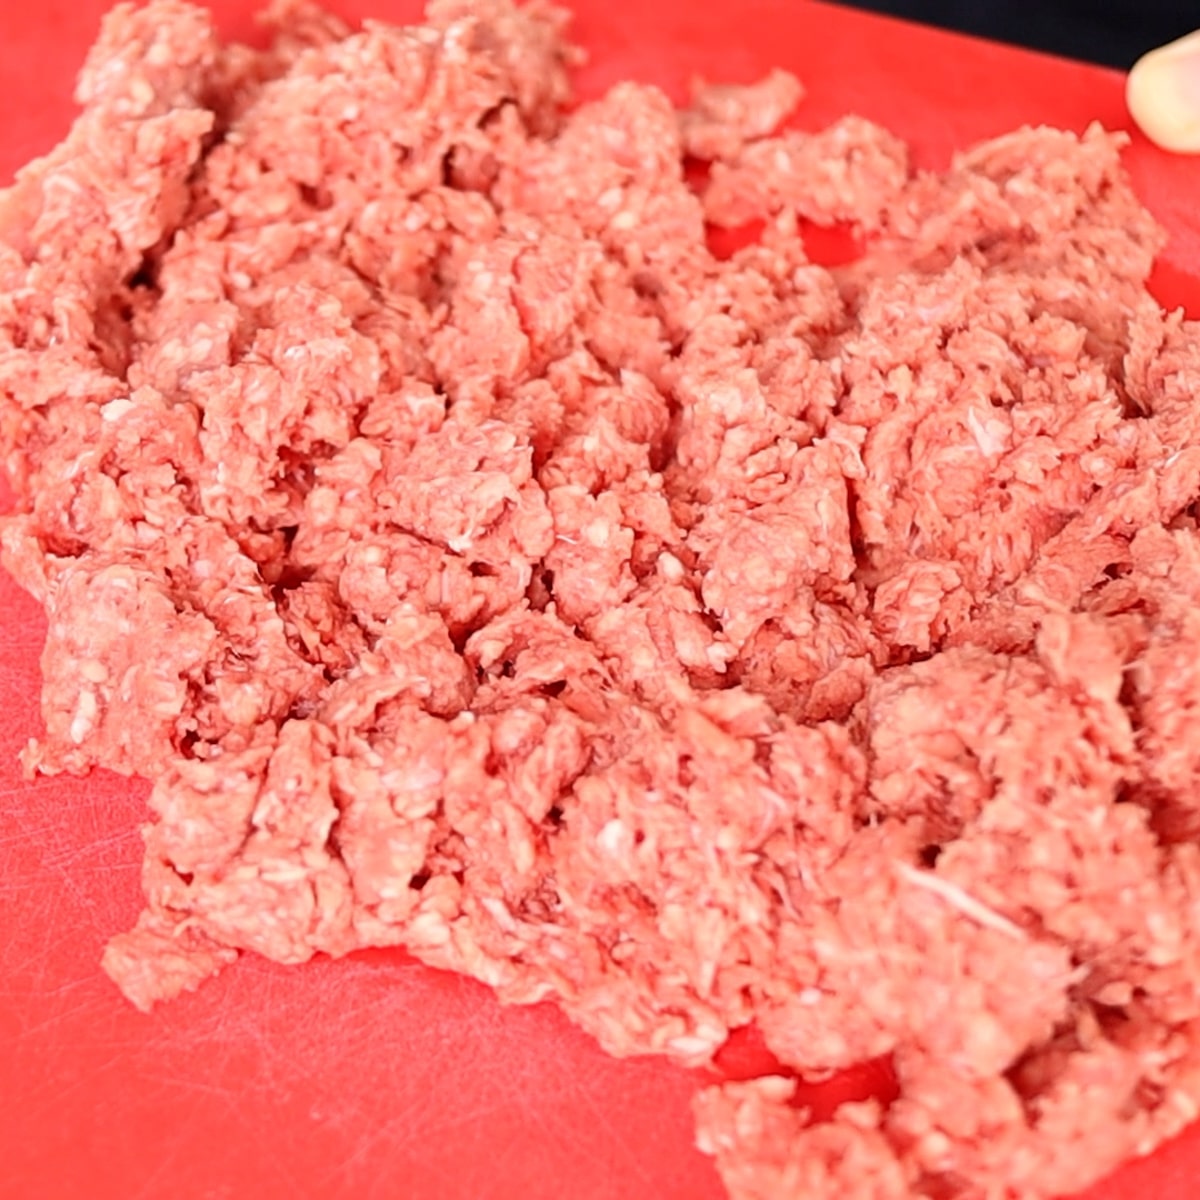 ground beef that looks fresh and good